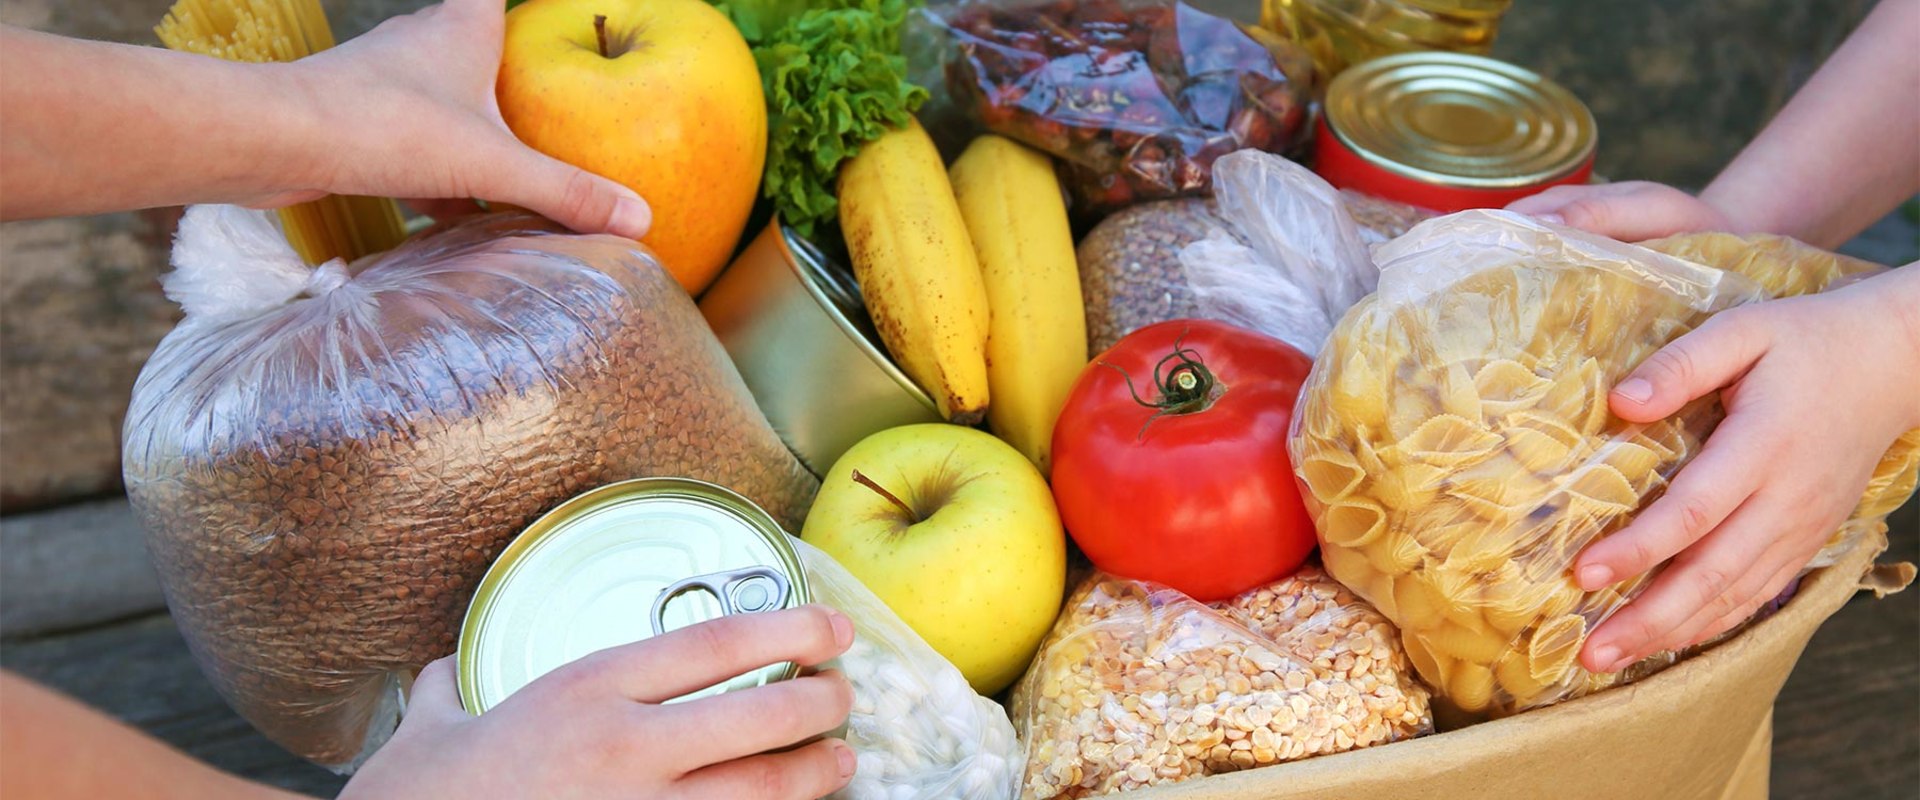 Healthy Eating Habits for Los Angeles County Residents